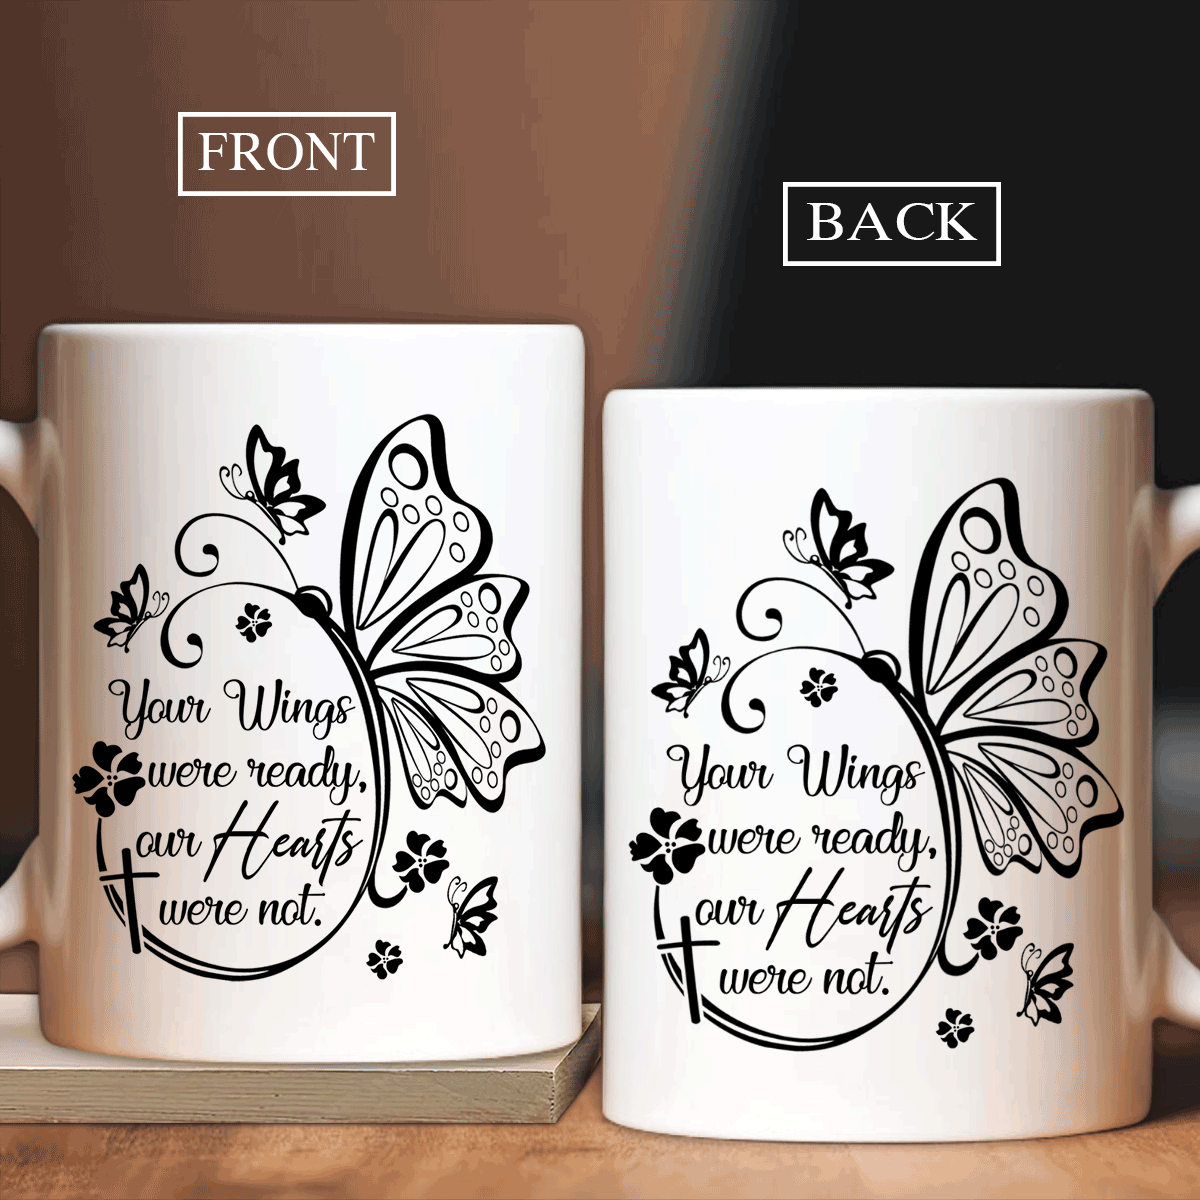 Memorial White Mug - Pretty butterfly, Black flower - Gift for members family - Your wings were ready, our hearts were not - Heaven White Mug.